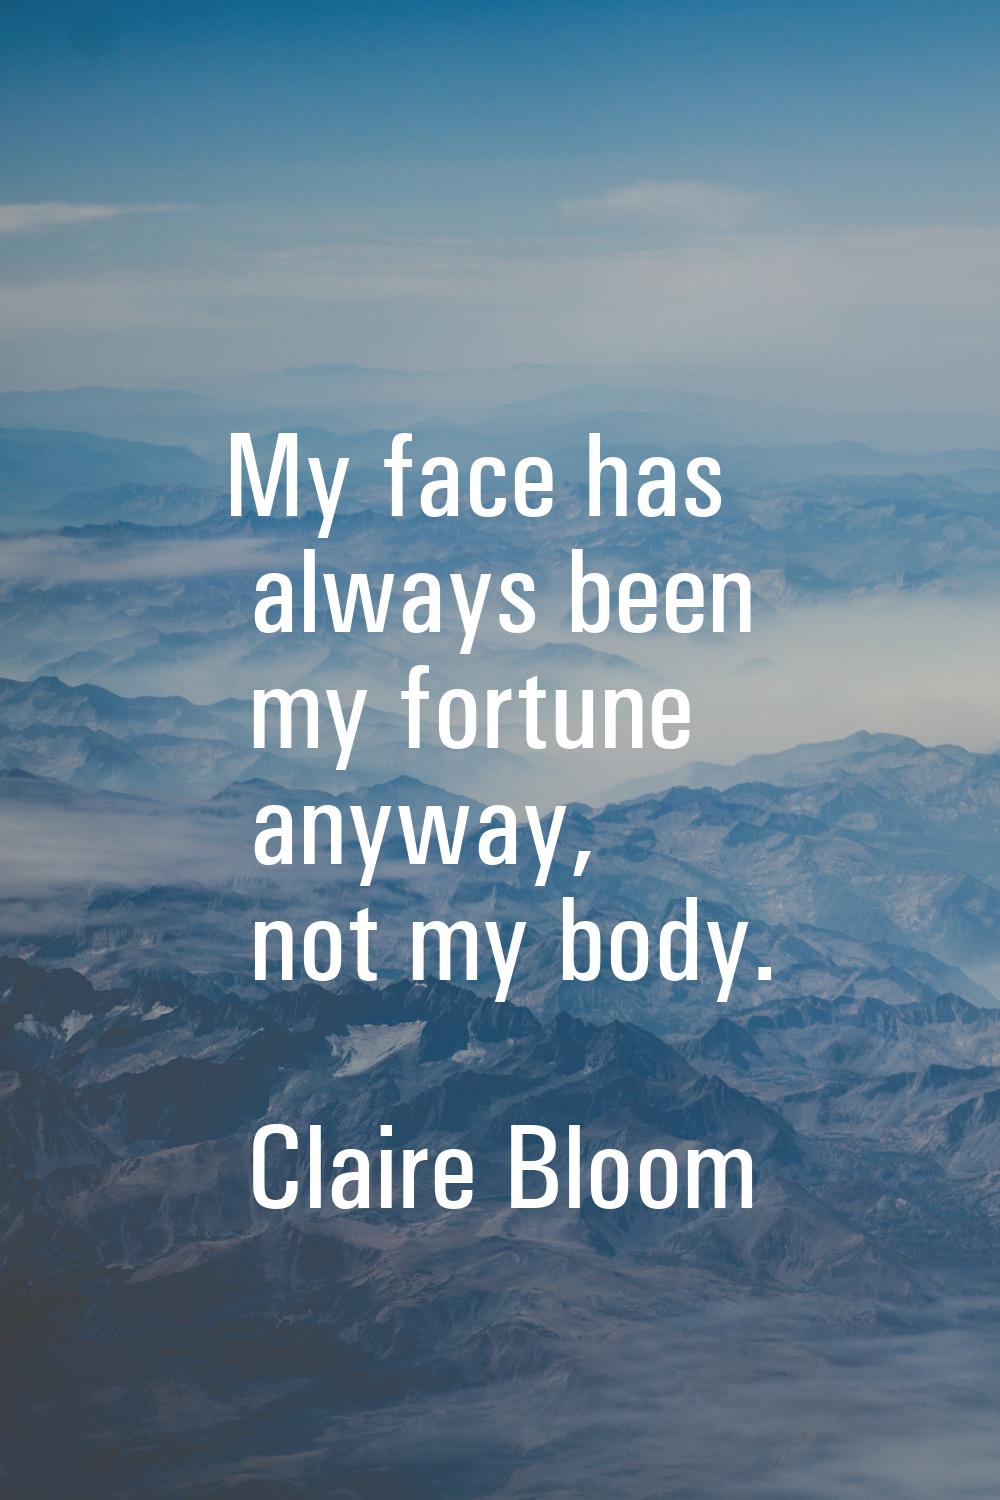 My face has always been my fortune anyway, not my body.